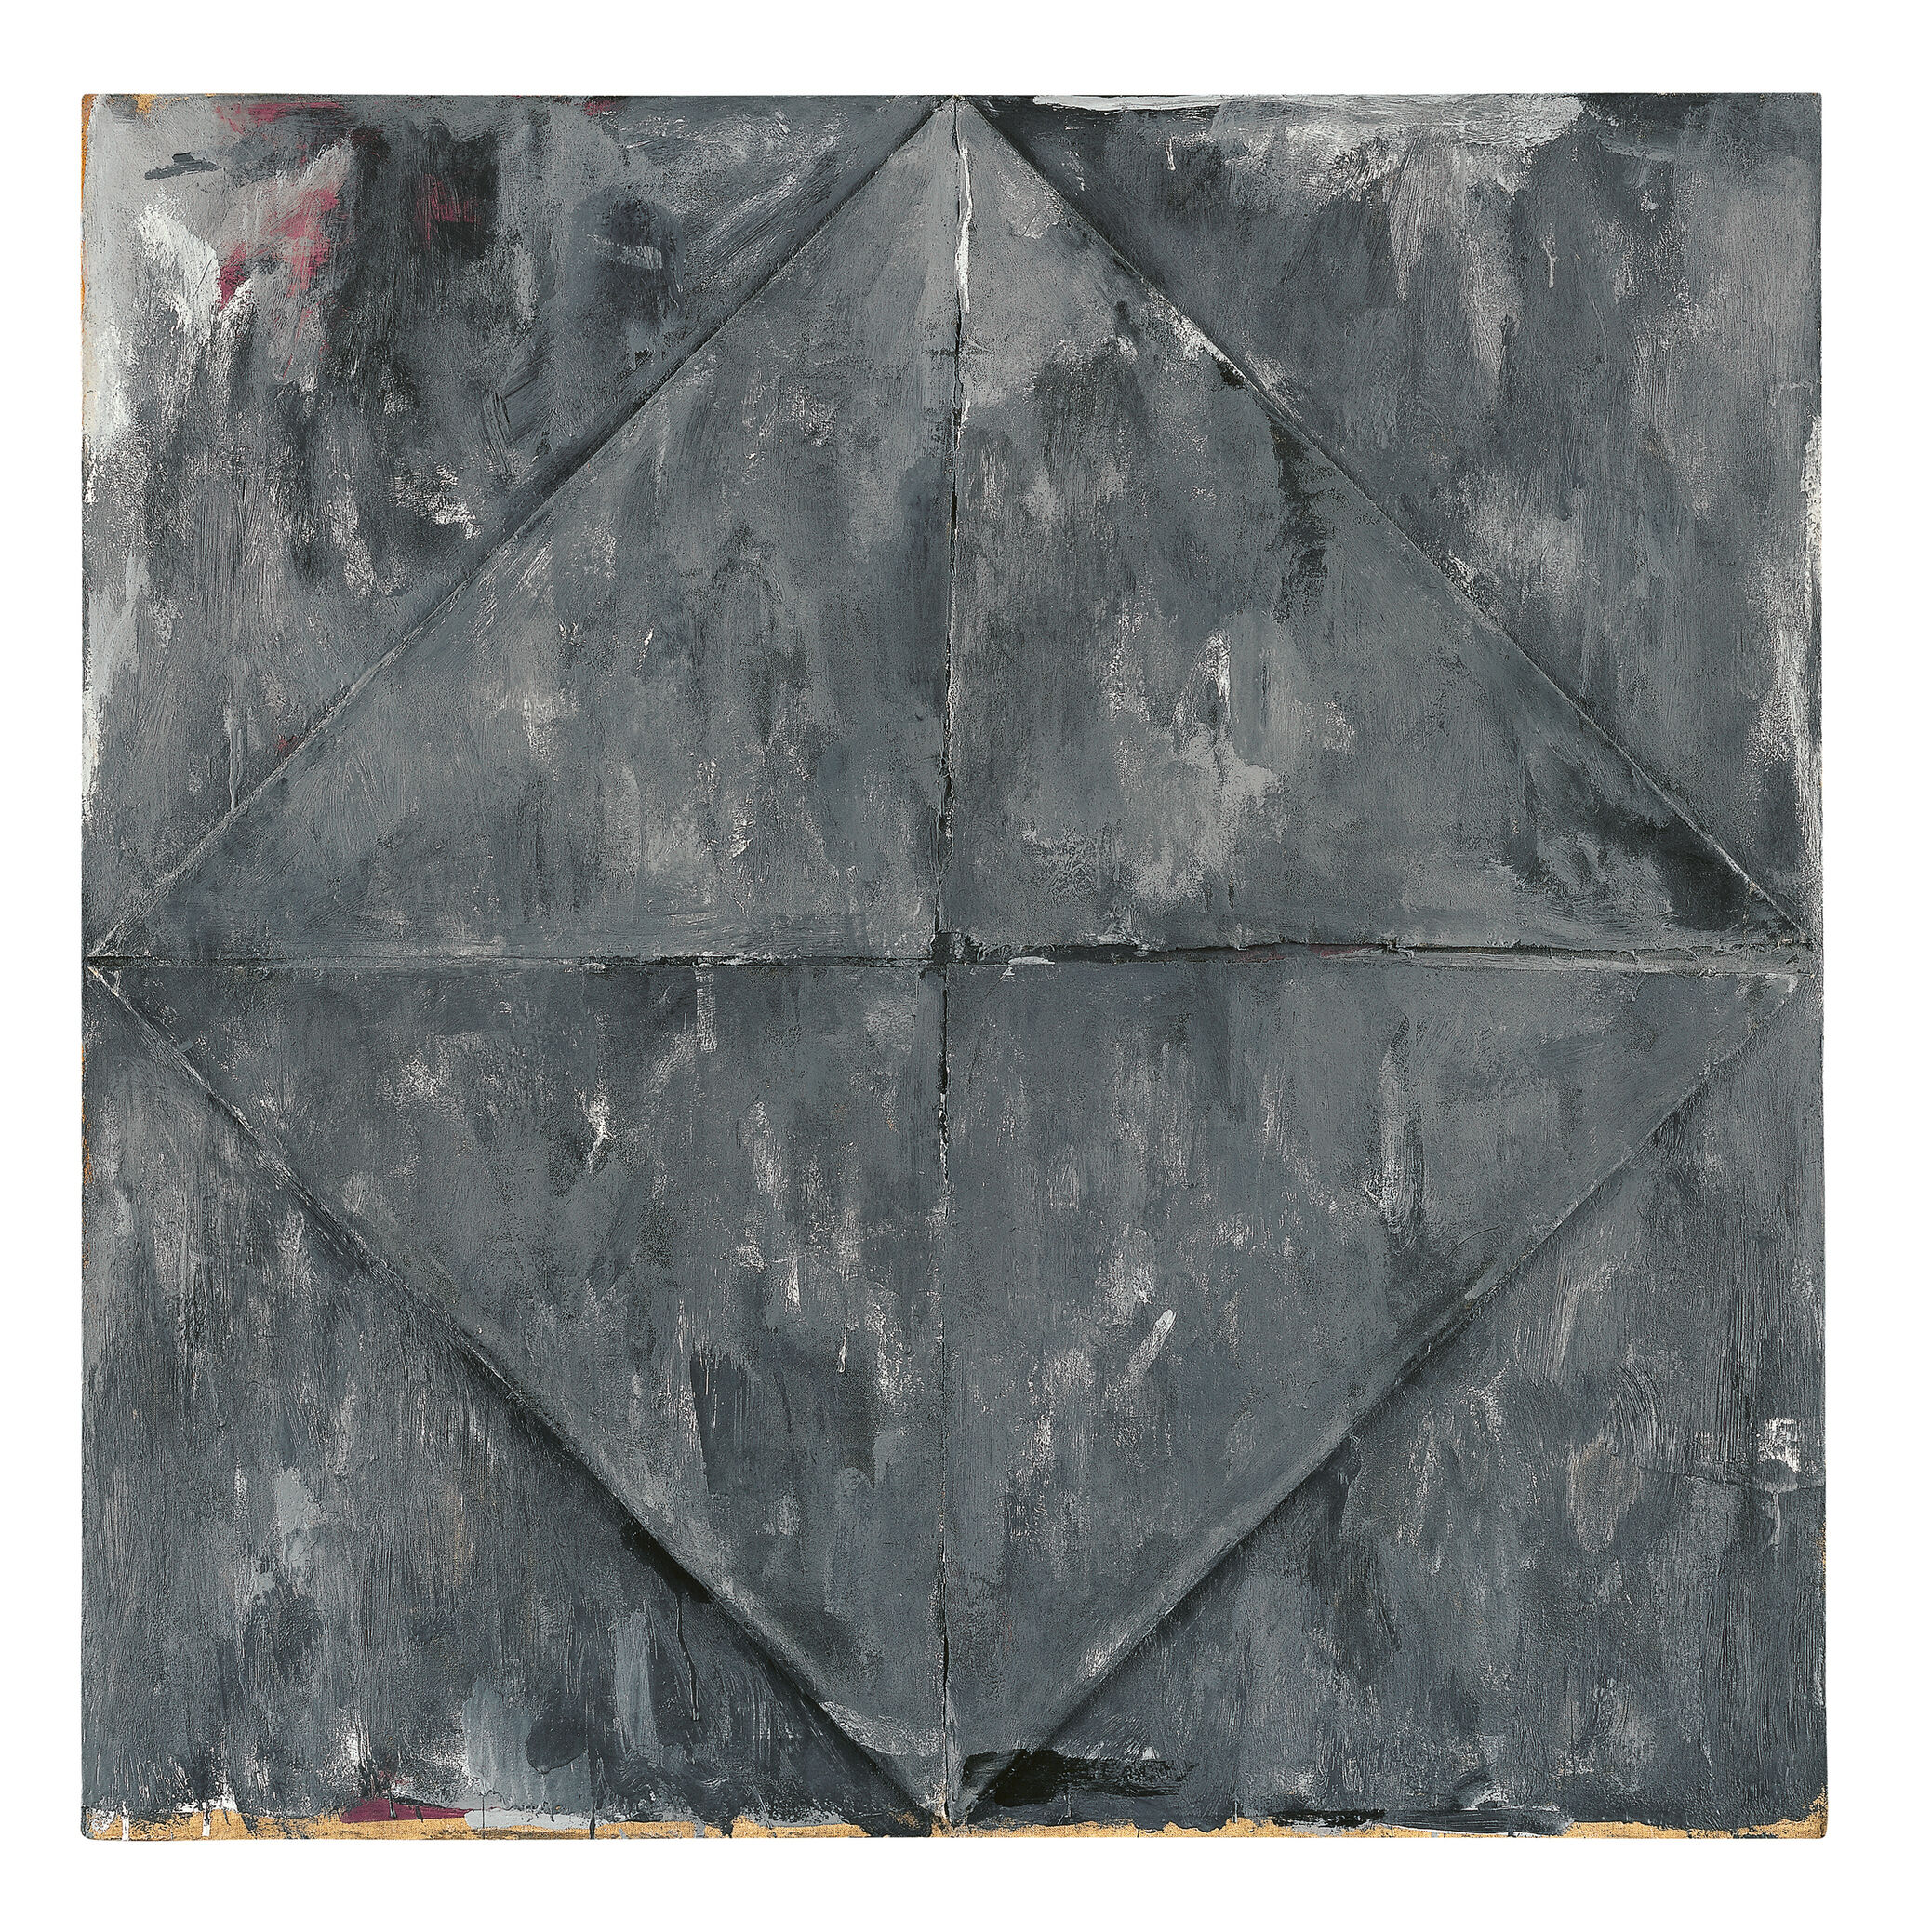 Square composition of gray brushstrokes, with the shape of a diamond, divided into four equal sections, subtly offset against the background.